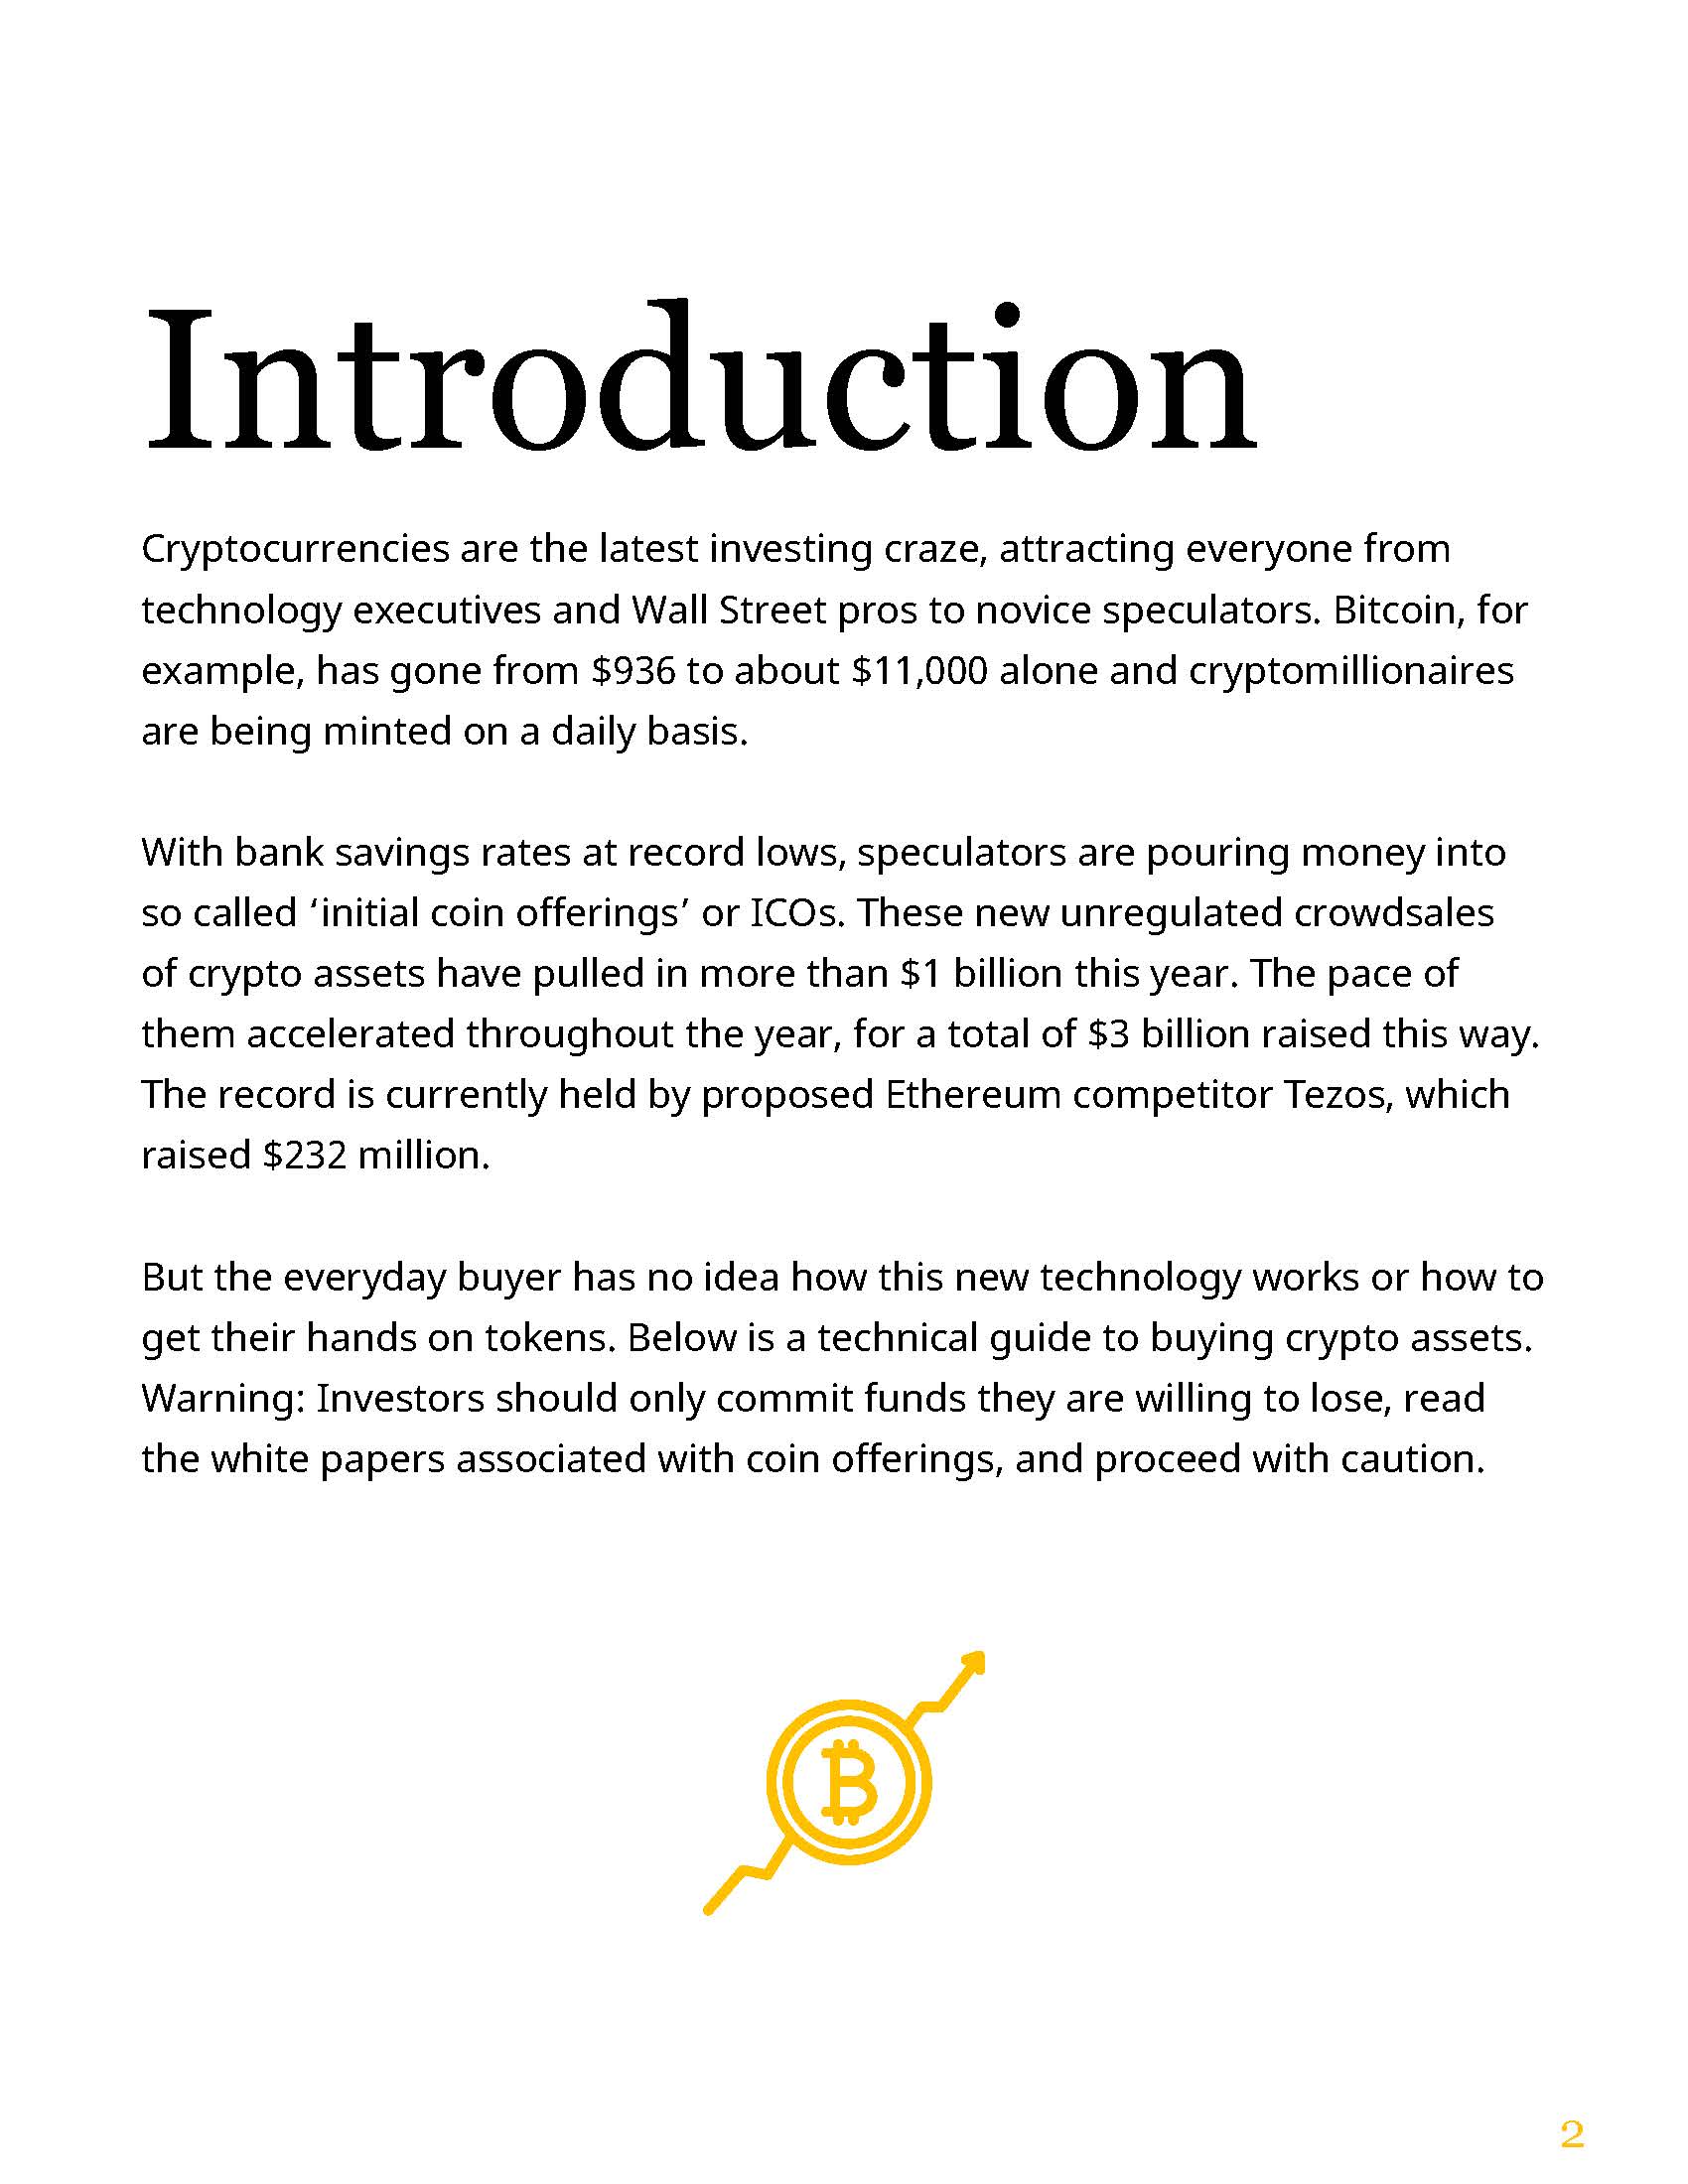 forbes-crypto-newsletter-r04_Page_02.jpg